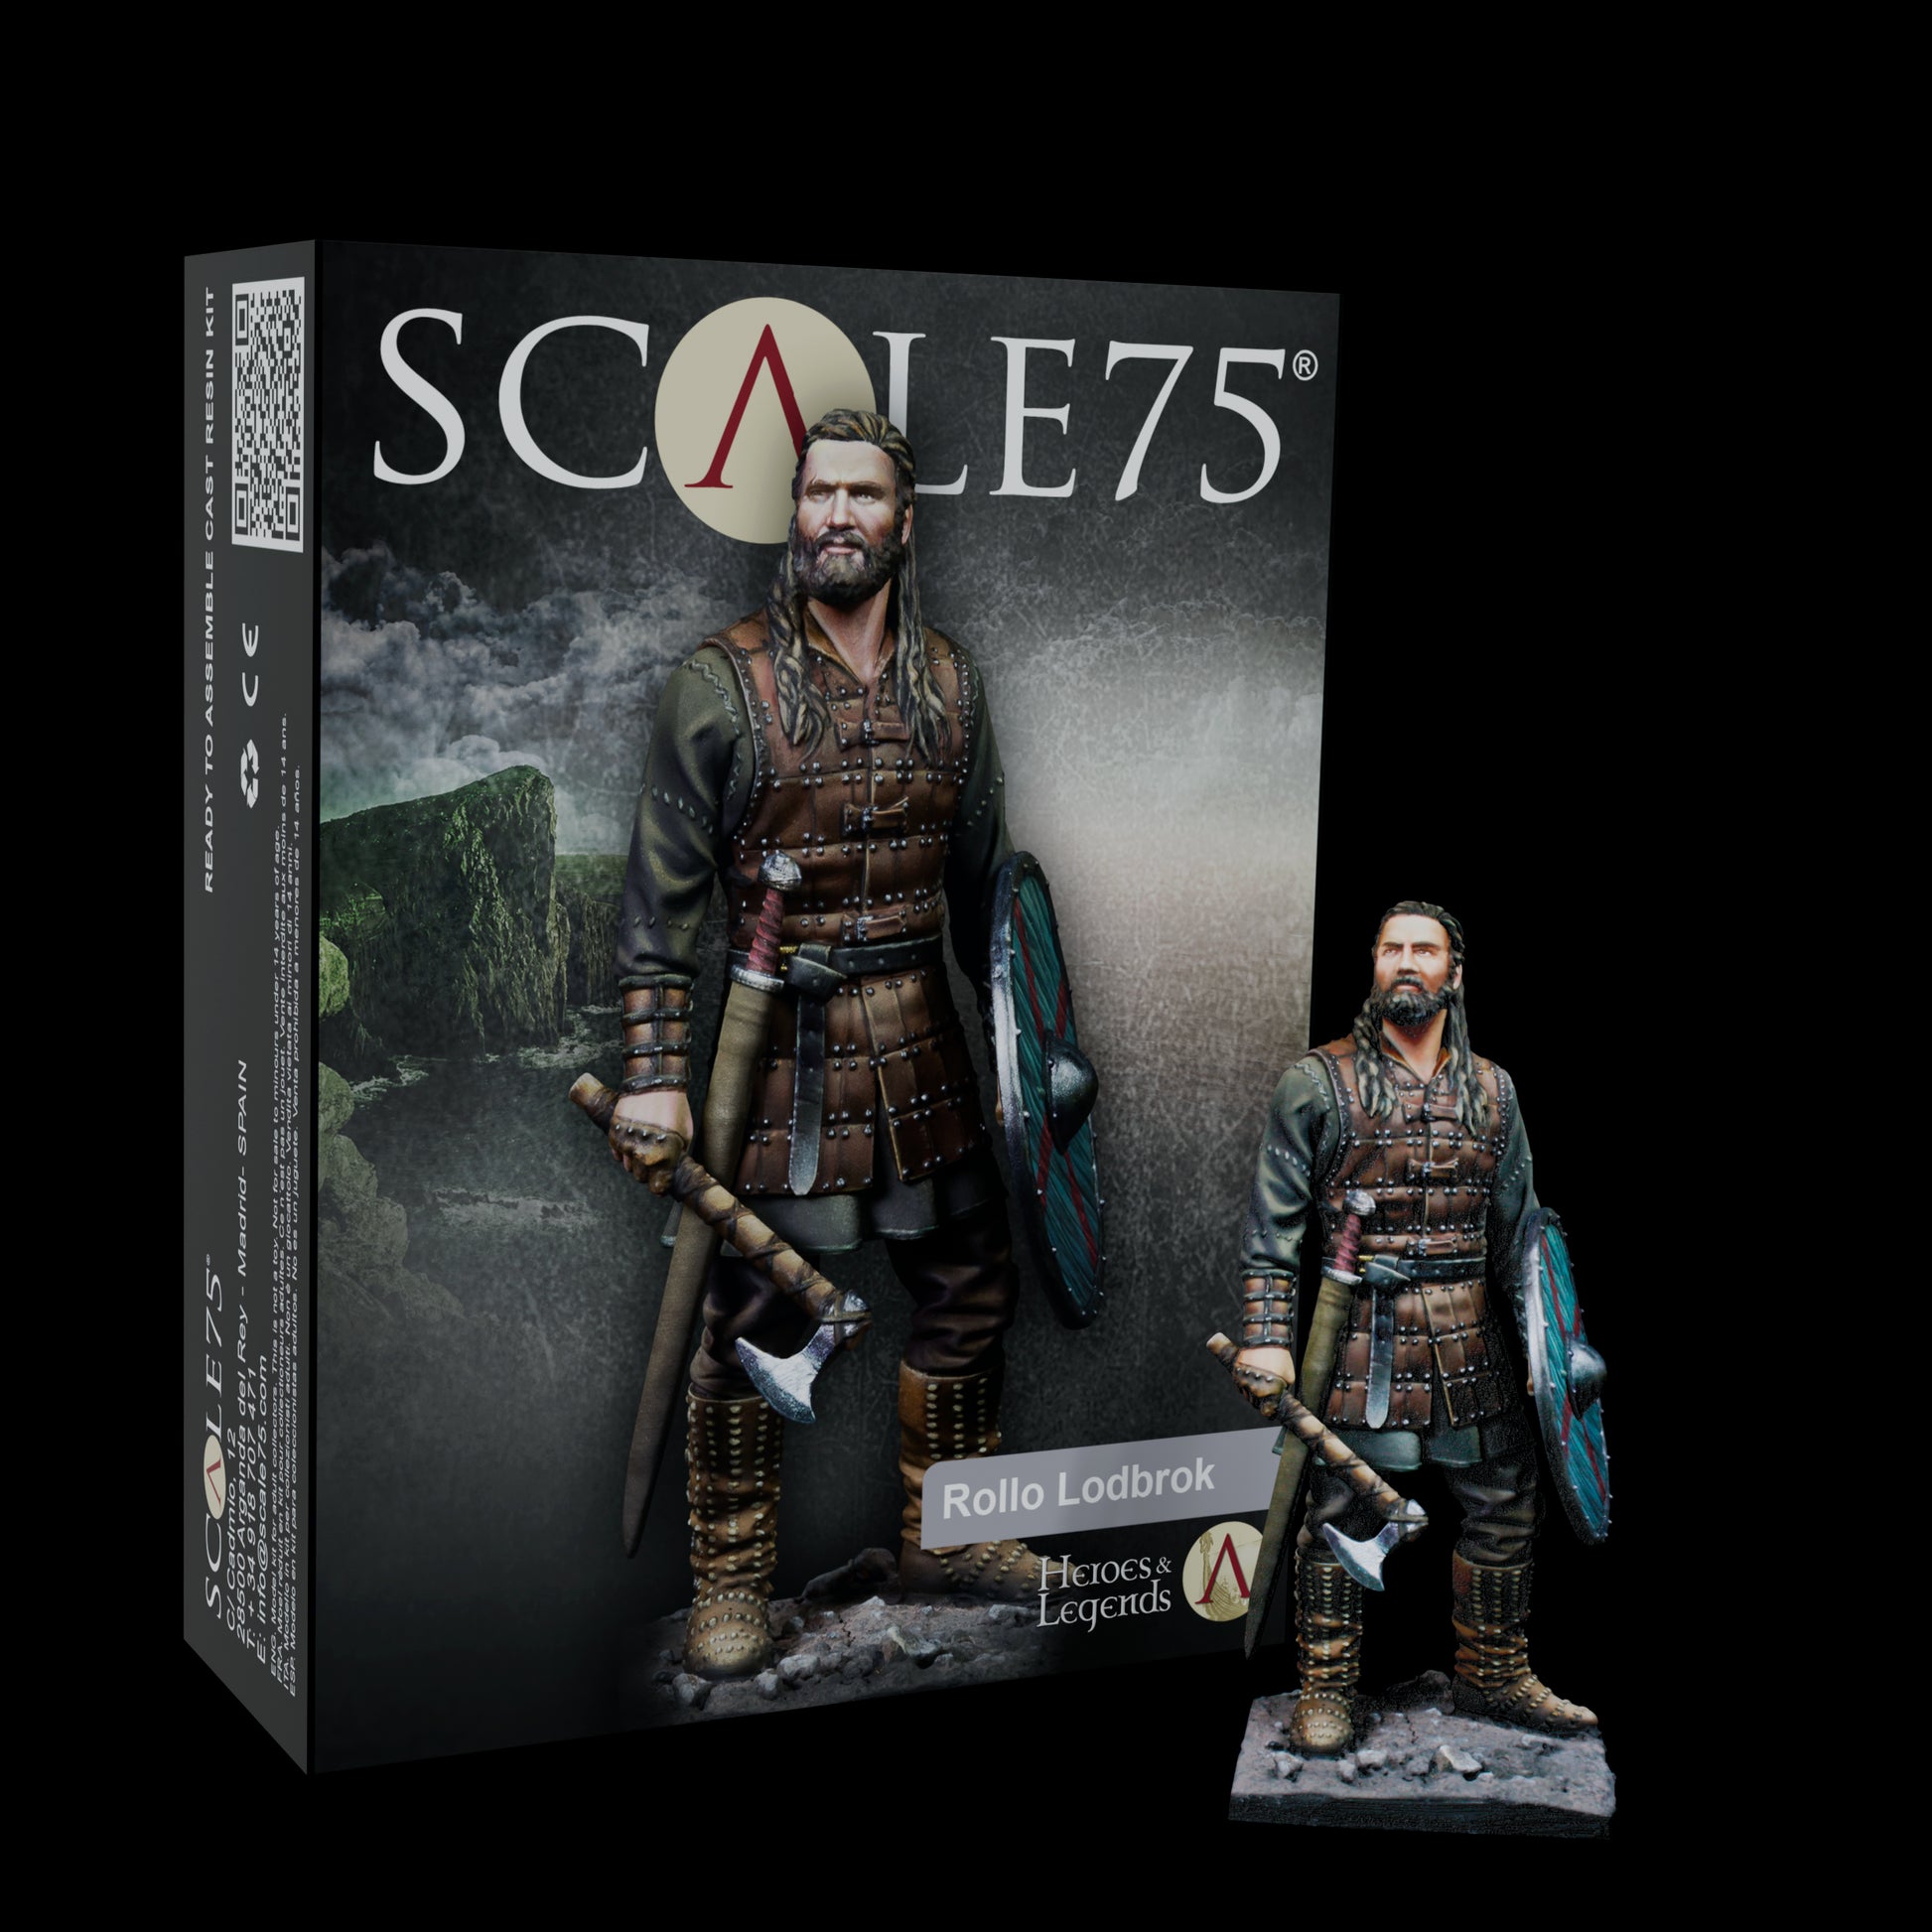 Scale 75 Figures - Heroes and Legends - Rollo Lodbrok 75mm